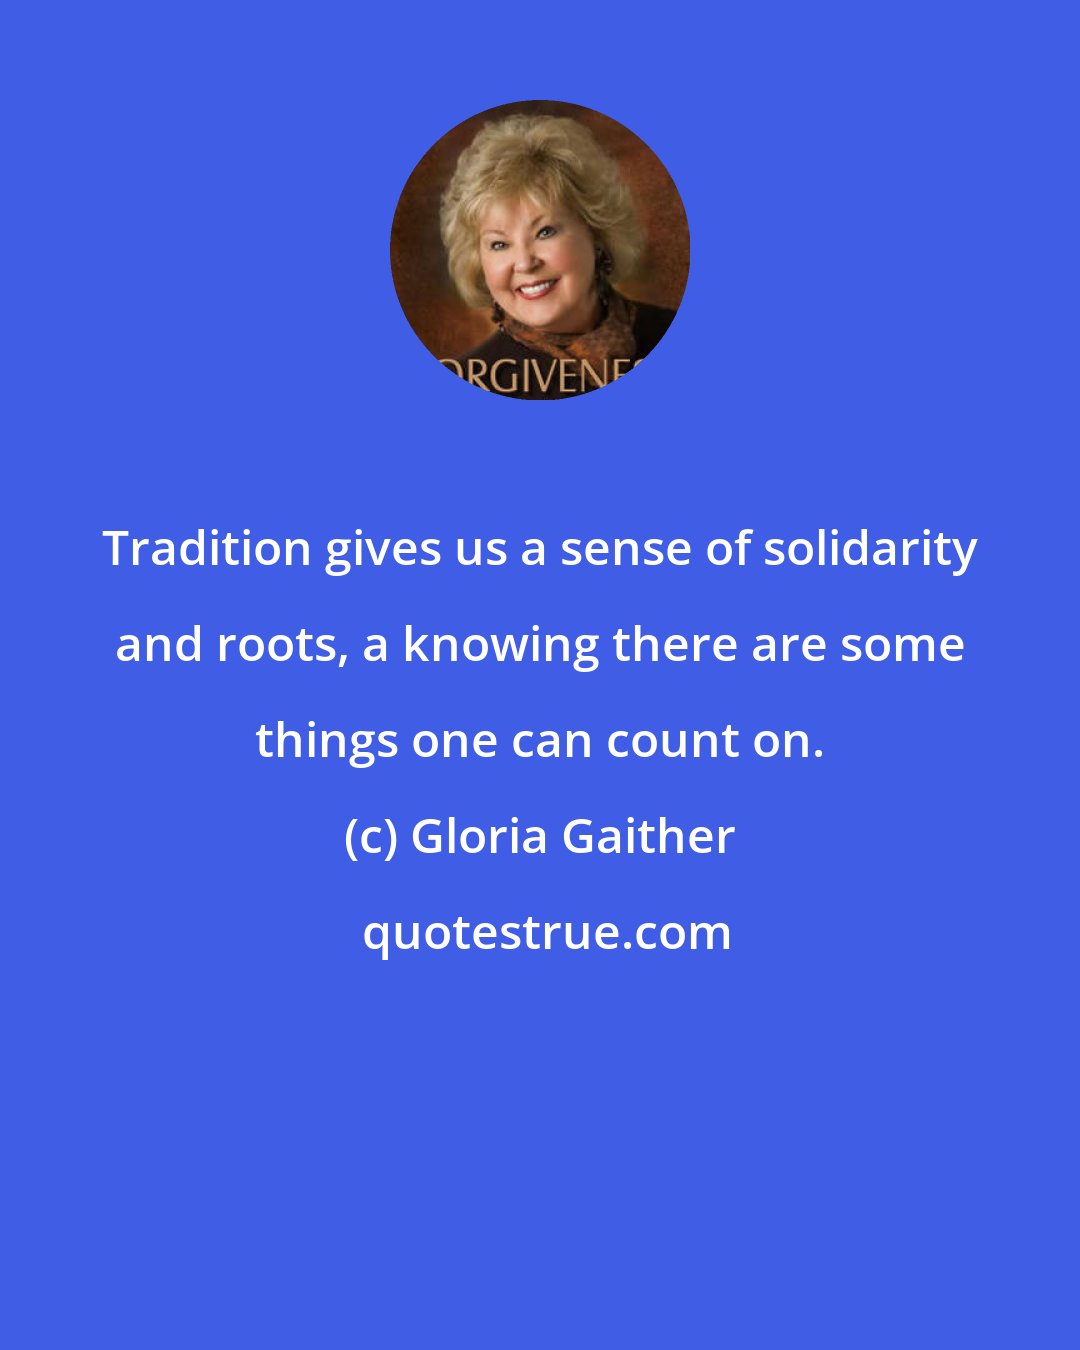 Gloria Gaither: Tradition gives us a sense of solidarity and roots, a knowing there are some things one can count on.